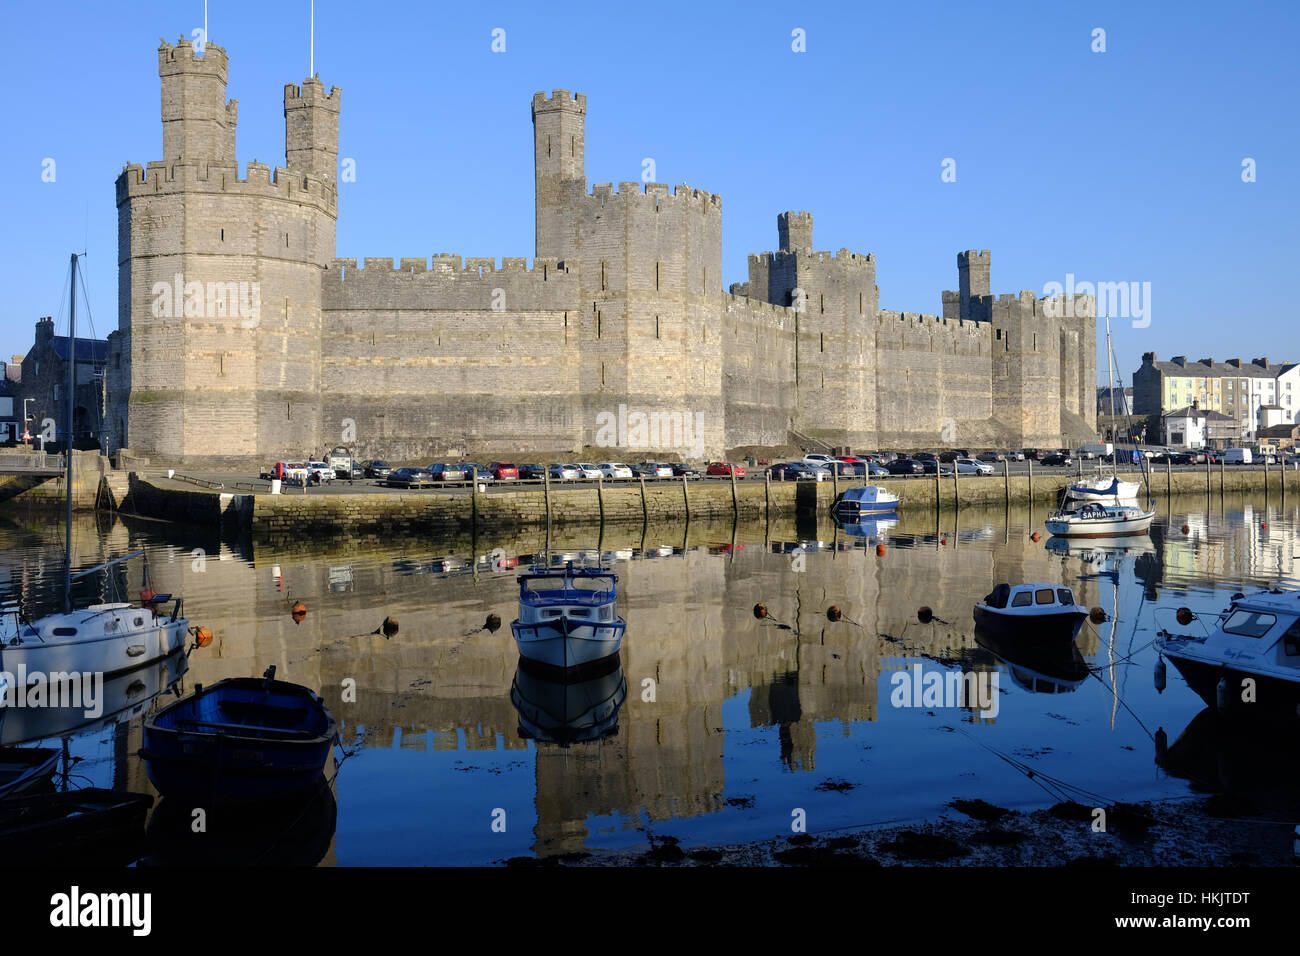 Caernarfon Castle in north Wales, viewed across the River Seiont Stock Photo